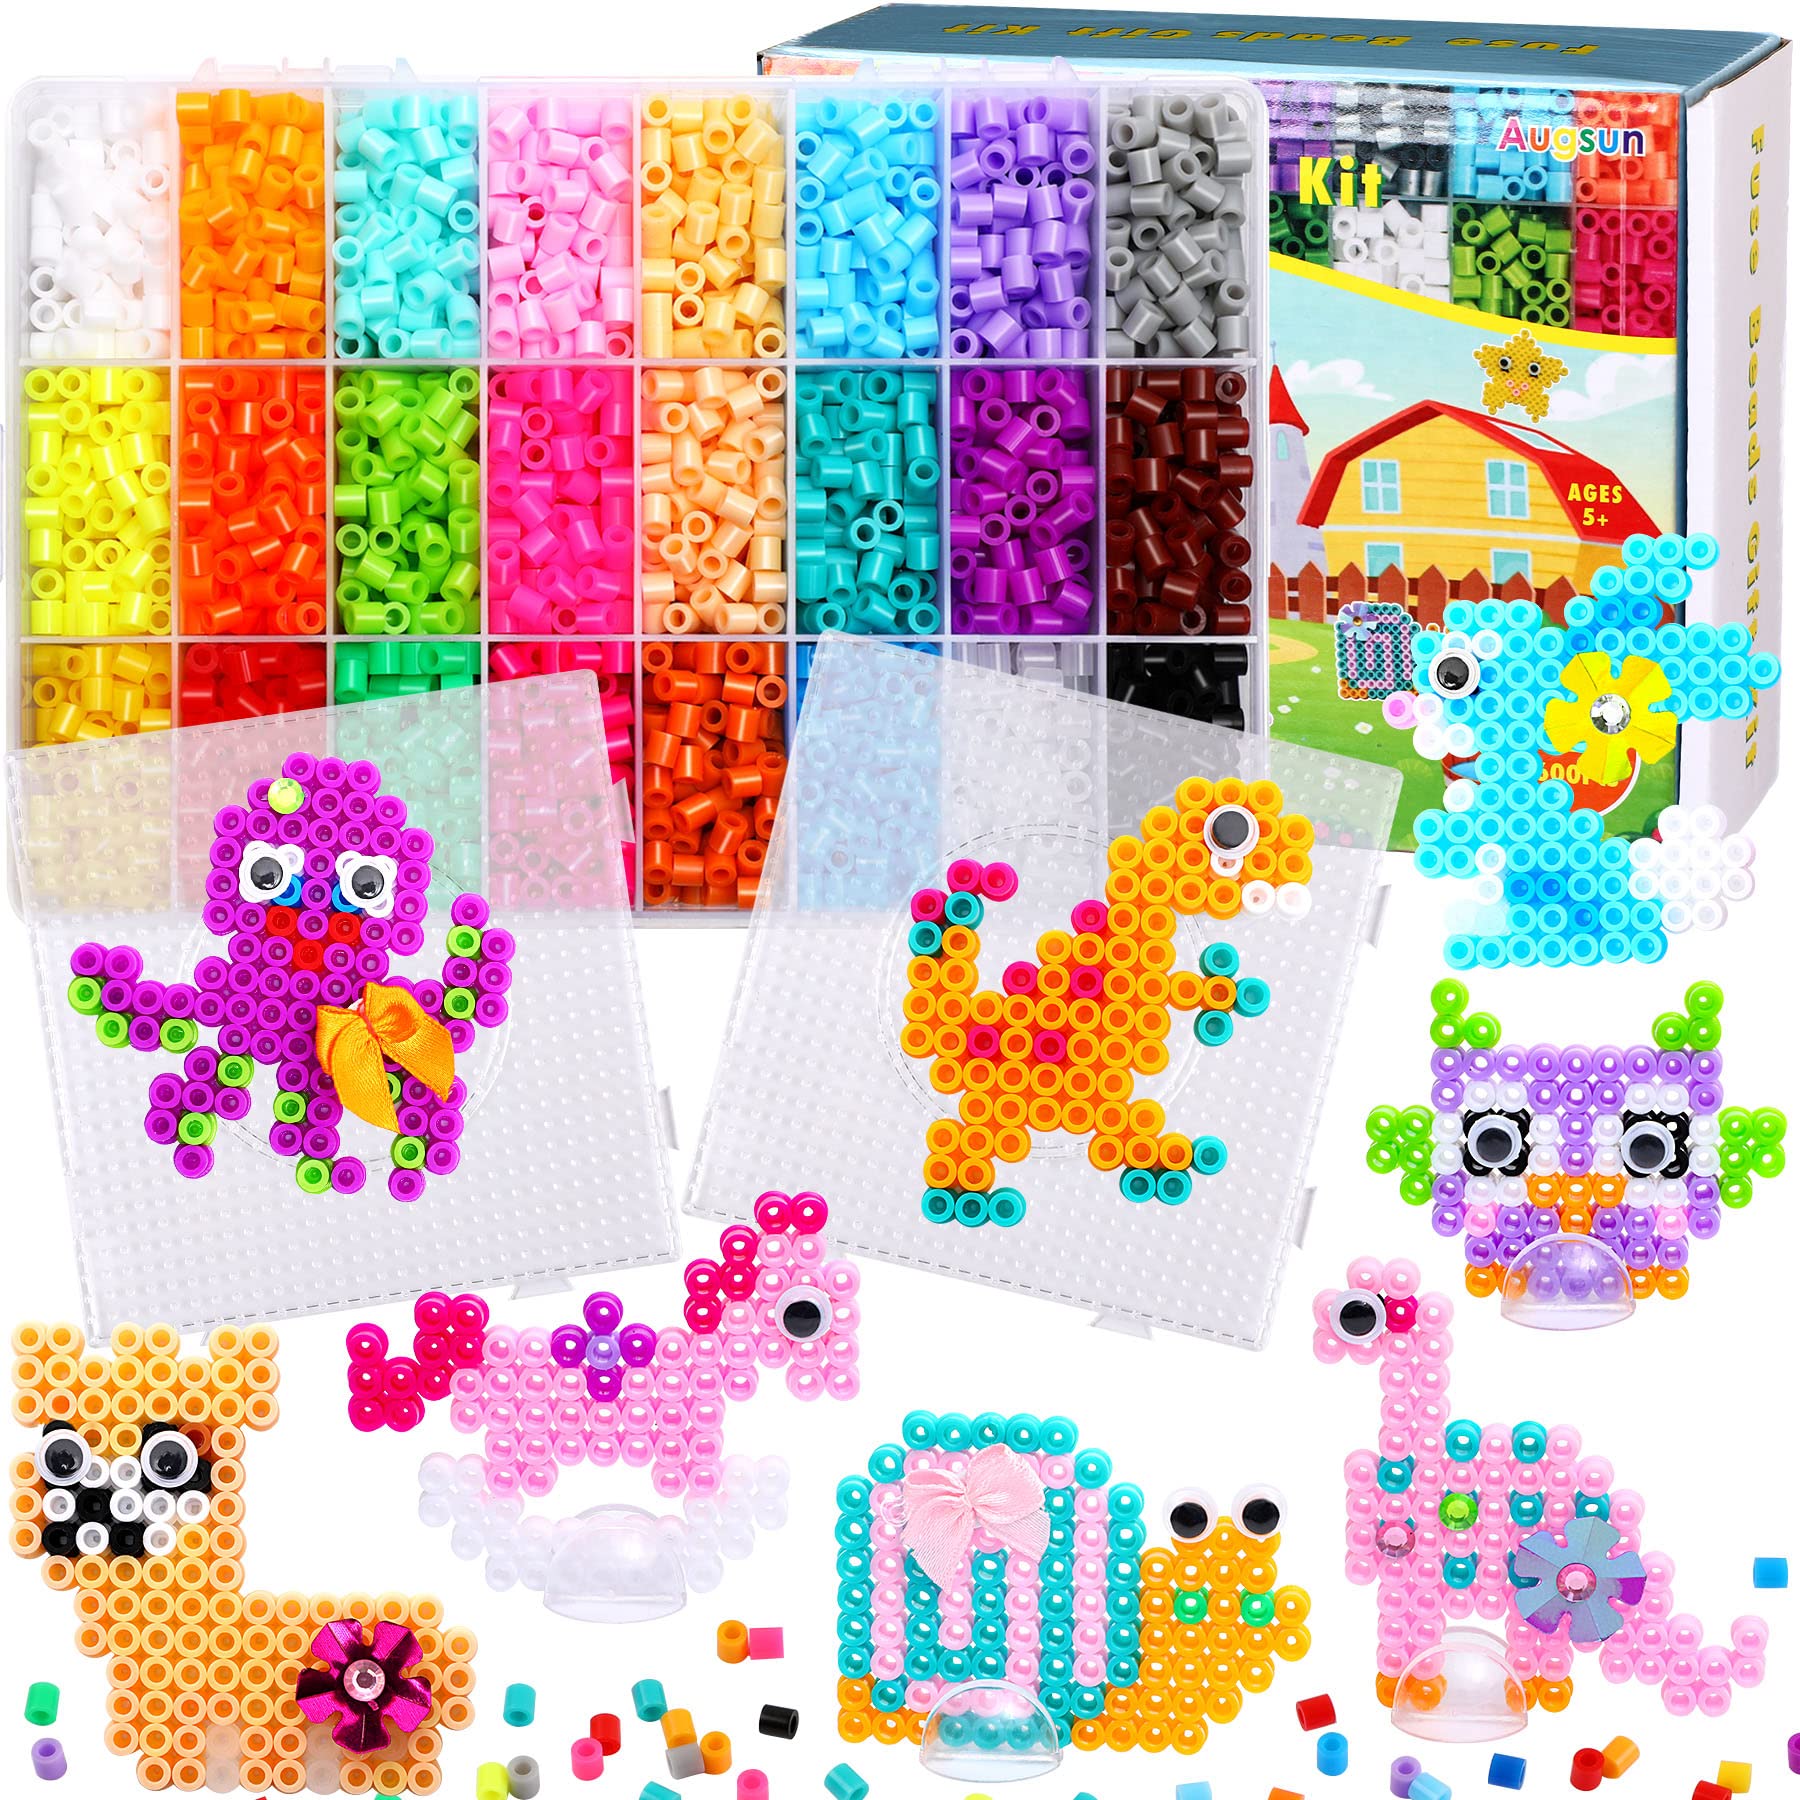 AUGSUN Fuse Beads Kit for Kids, 4600Pcs+ 24 Colors Crafting Melting Iron Beads  Set with 2 Pegboards, 15 Patterns, Ironing Paper & Wiggle Eyes Accessories  for Boys Girls Craft Making